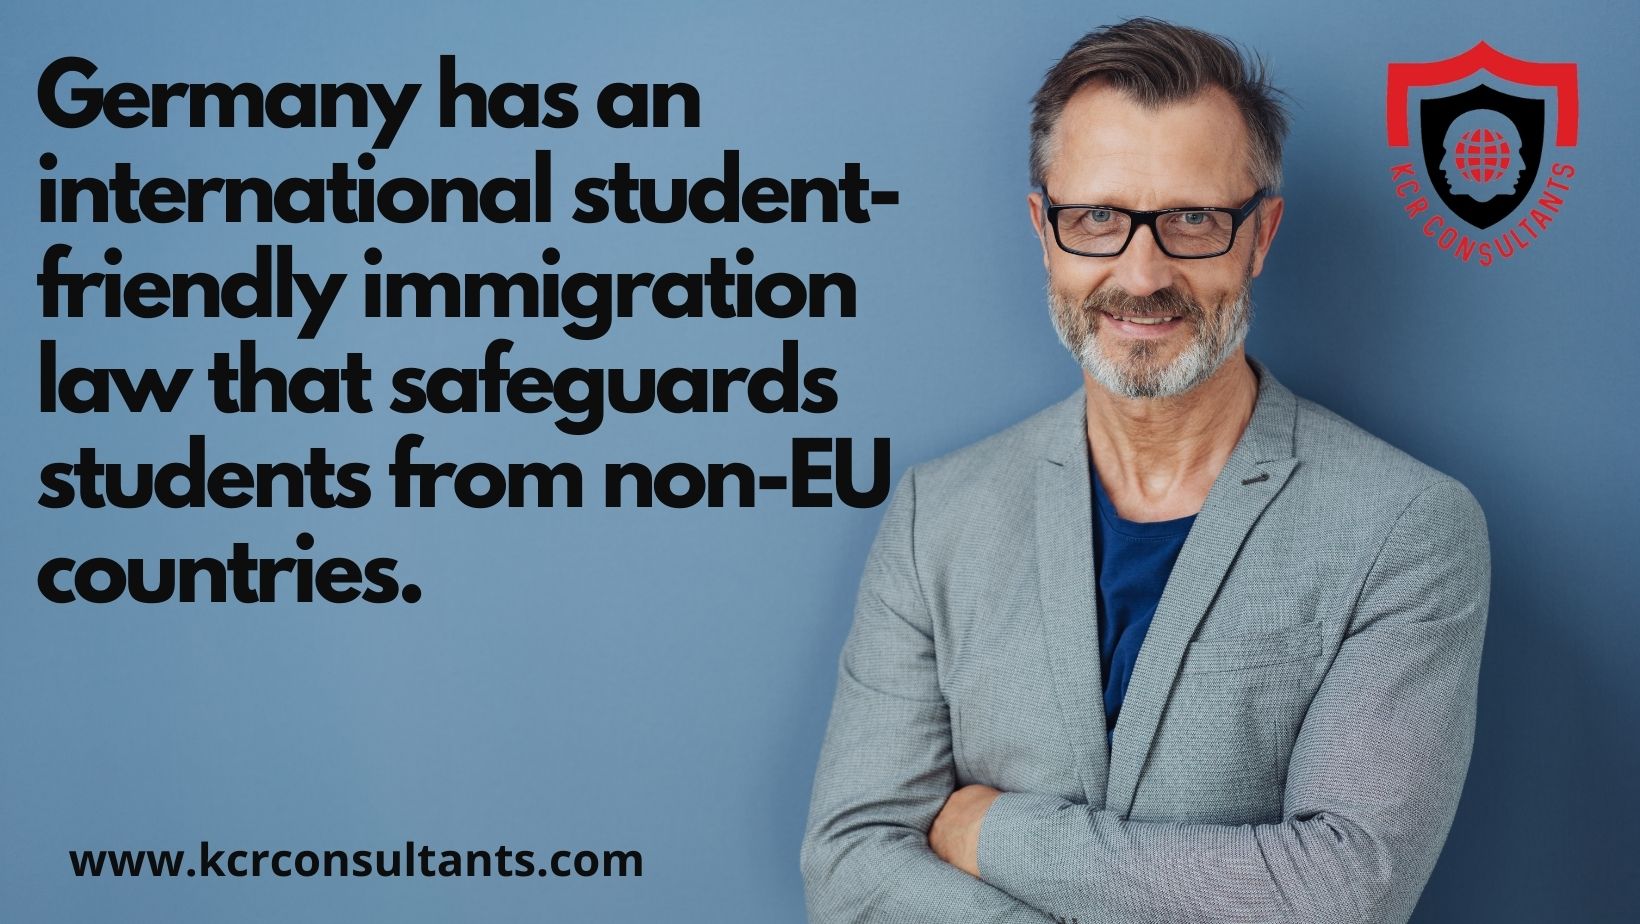 Germany has an international student-friendly immigration law that safeguards students from non-EU countries.